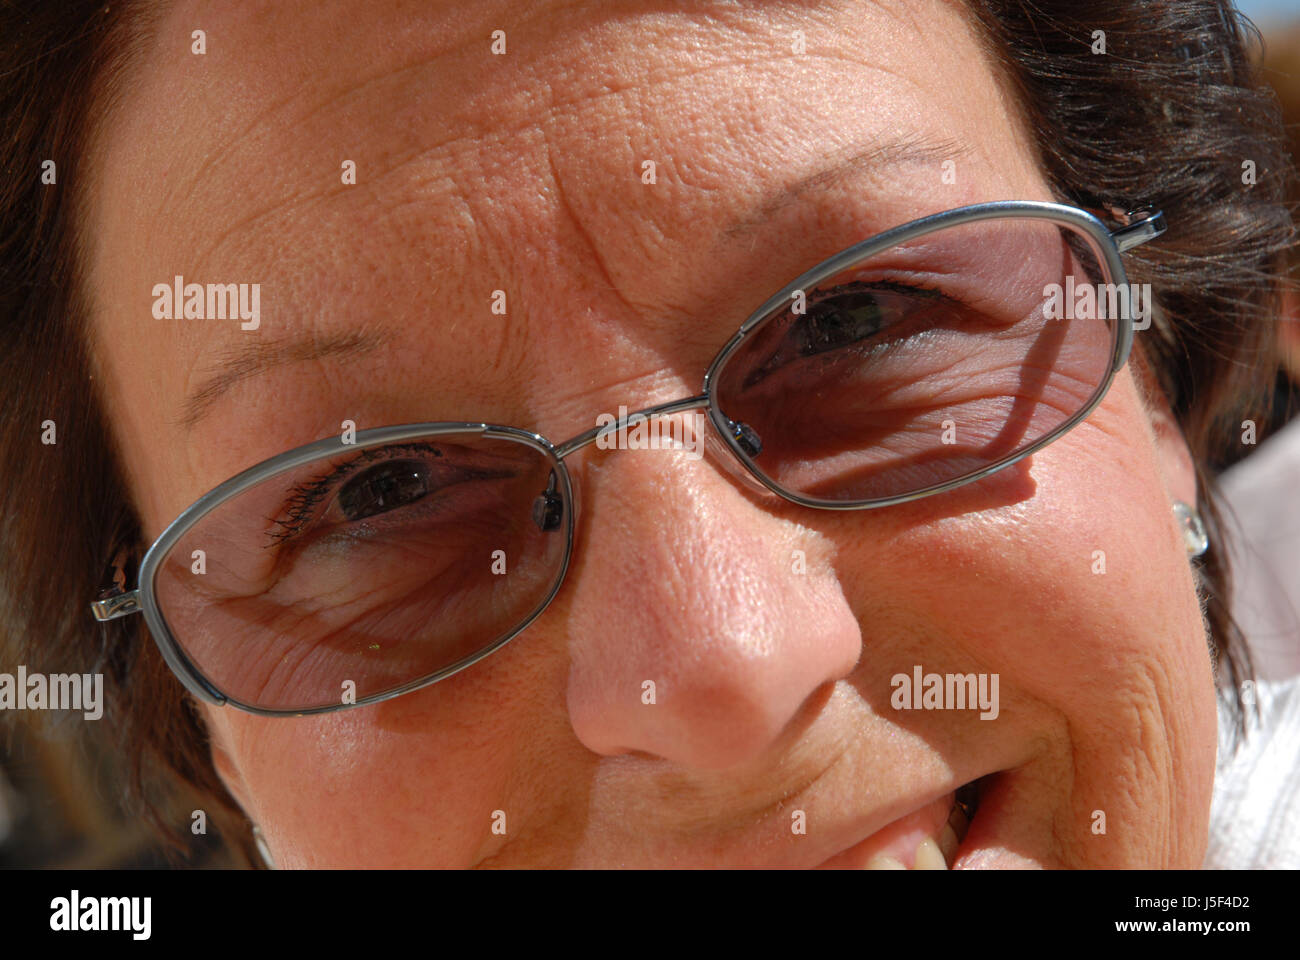 woman laugh laughs laughing twit giggle smile smiling laughter laughingly Stock Photo